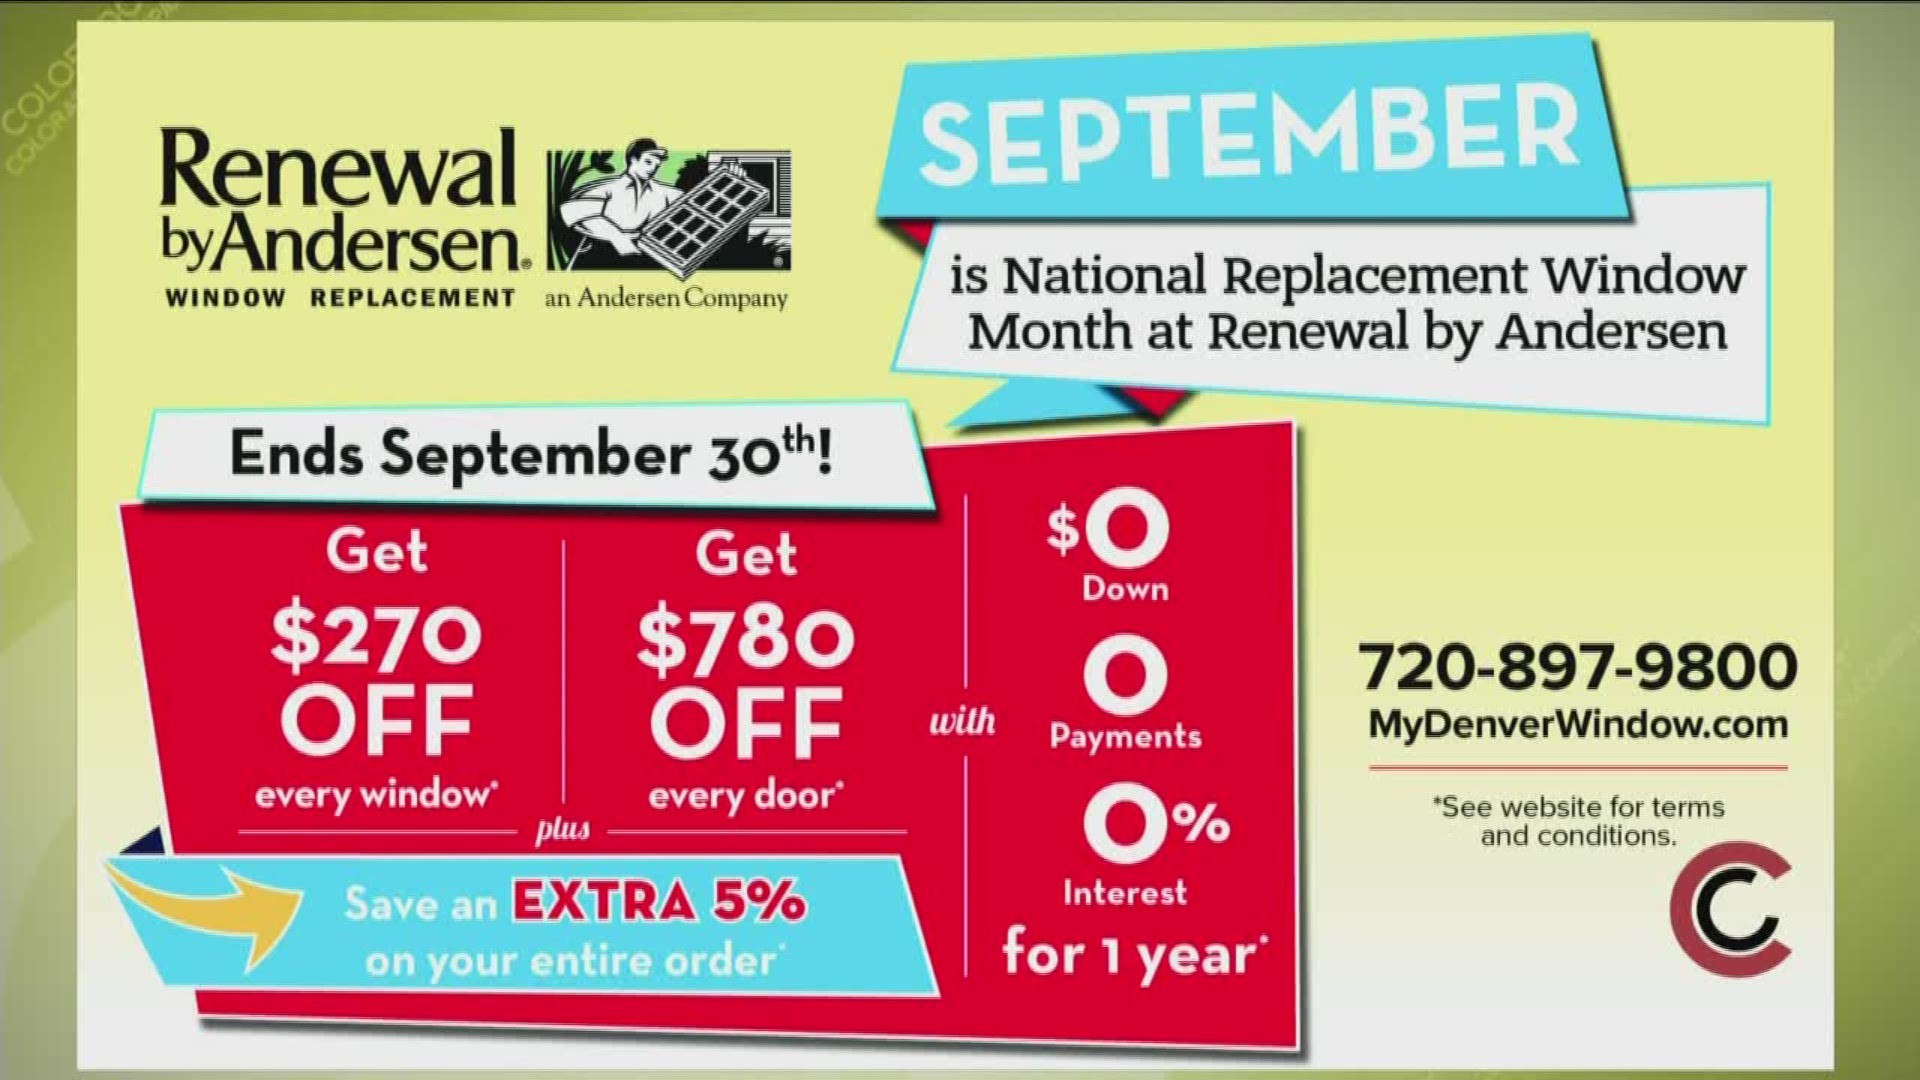 It’s National Replacement Window Month at Renewal by Andersen. Now until the end of the month, take $270 off of every window, and $780 off of every entry/patio door. Plus, save an extra 5% on your entire order. Zero down, zero payments and zero interest for a full year. Call 720.897.9800 or visit www.MyDenverWindow.com to schedule your free Window and Door Diagnosis. 
THIS INTERVIEW HAS COMMERCIAL CONTENT. PRODUCTS AND SERVICES FEATURED APPEAR AS PAID ADVERTISING.